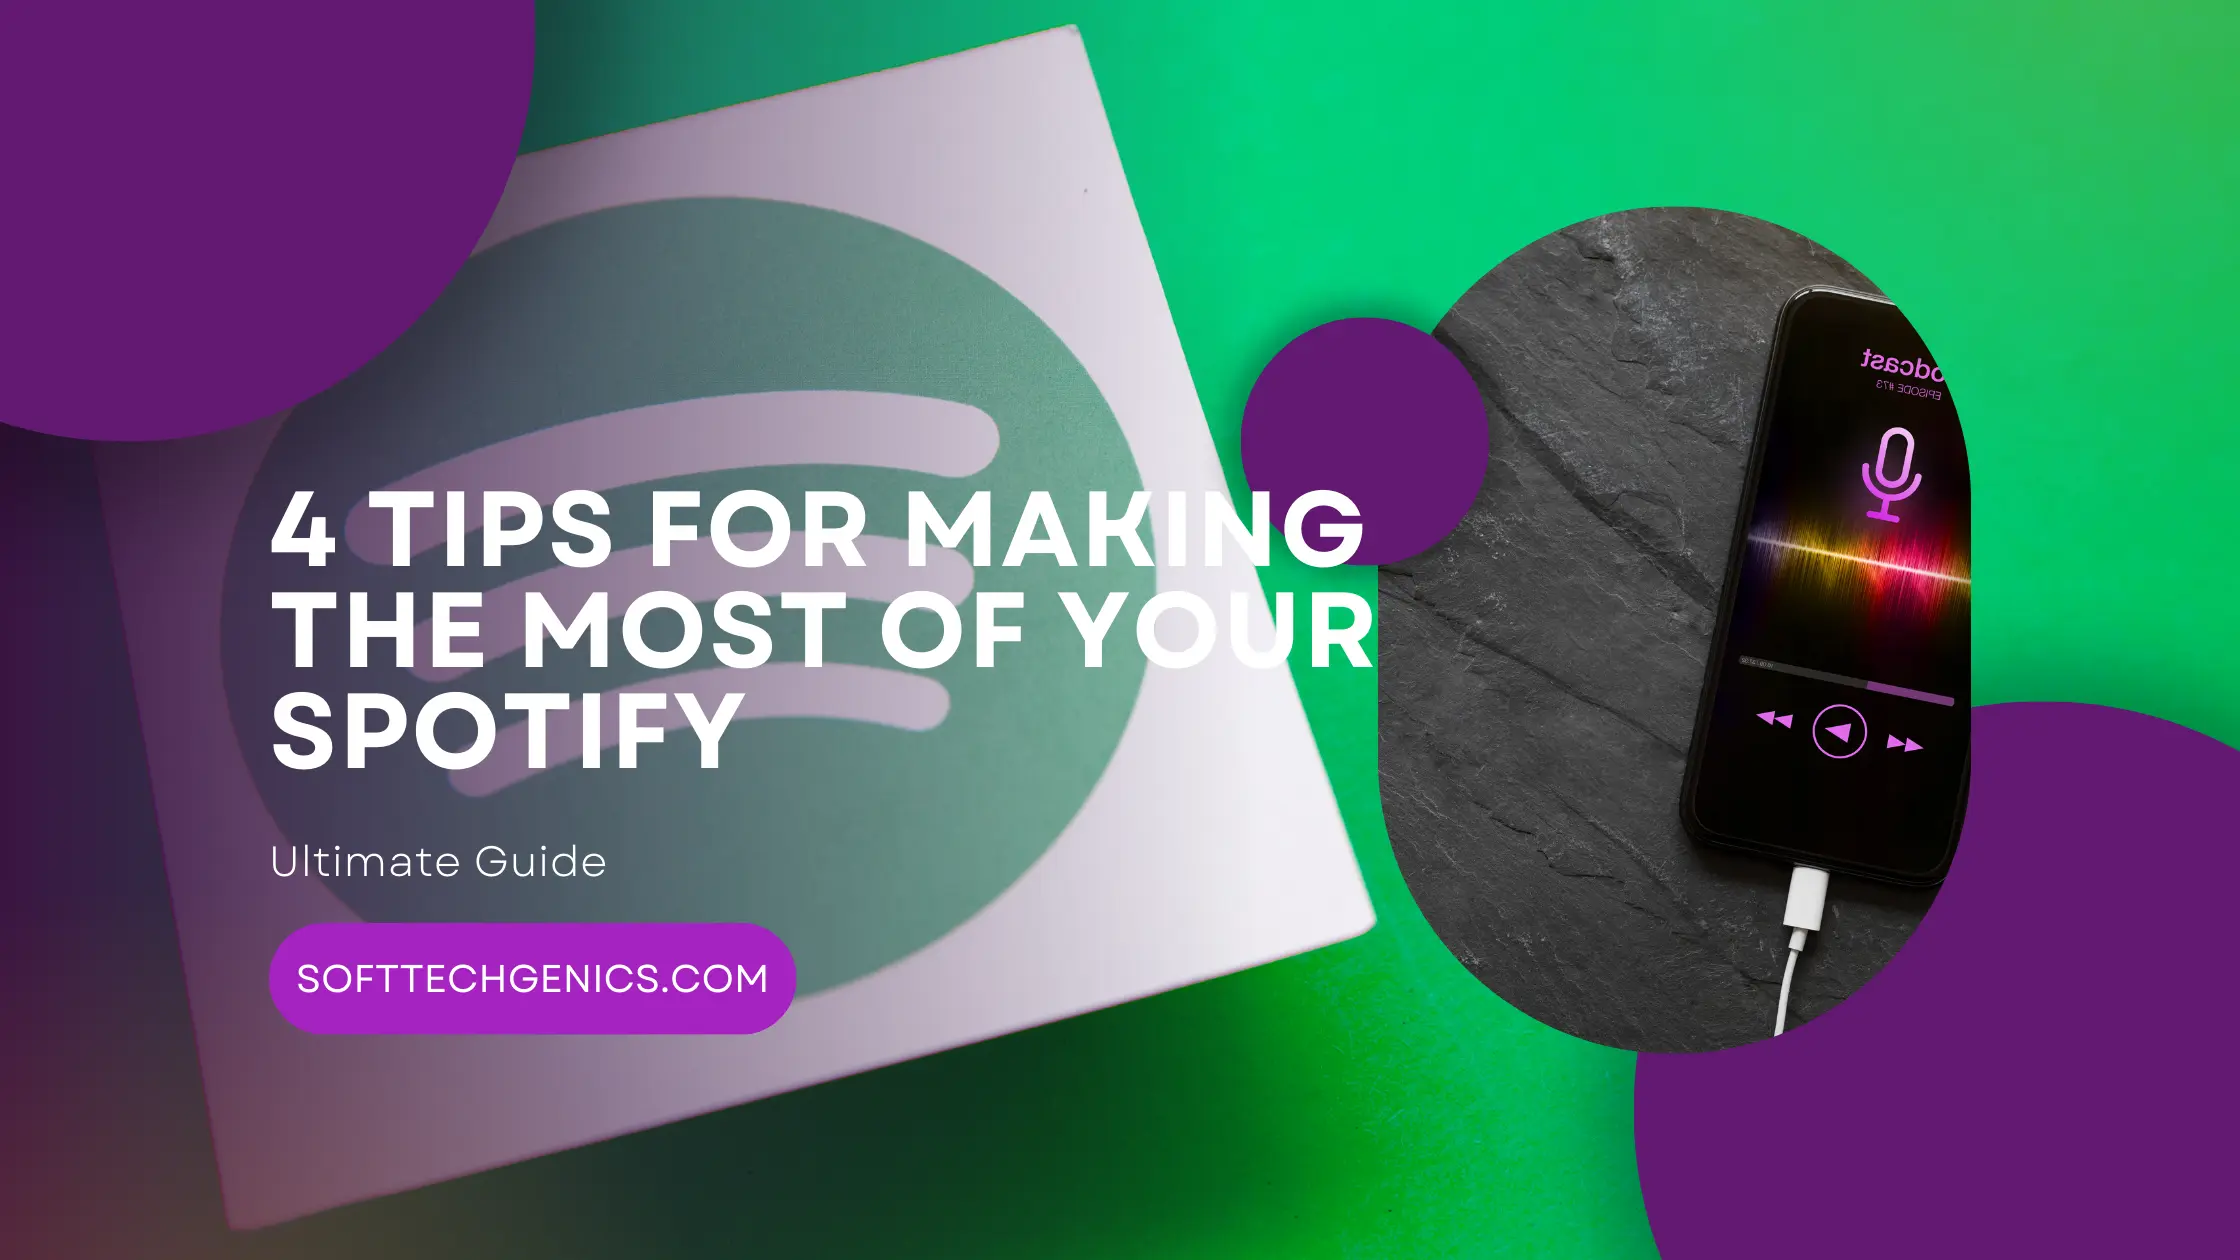 4 Tips for Making the Most of Your Spotify: Ultimate Guide